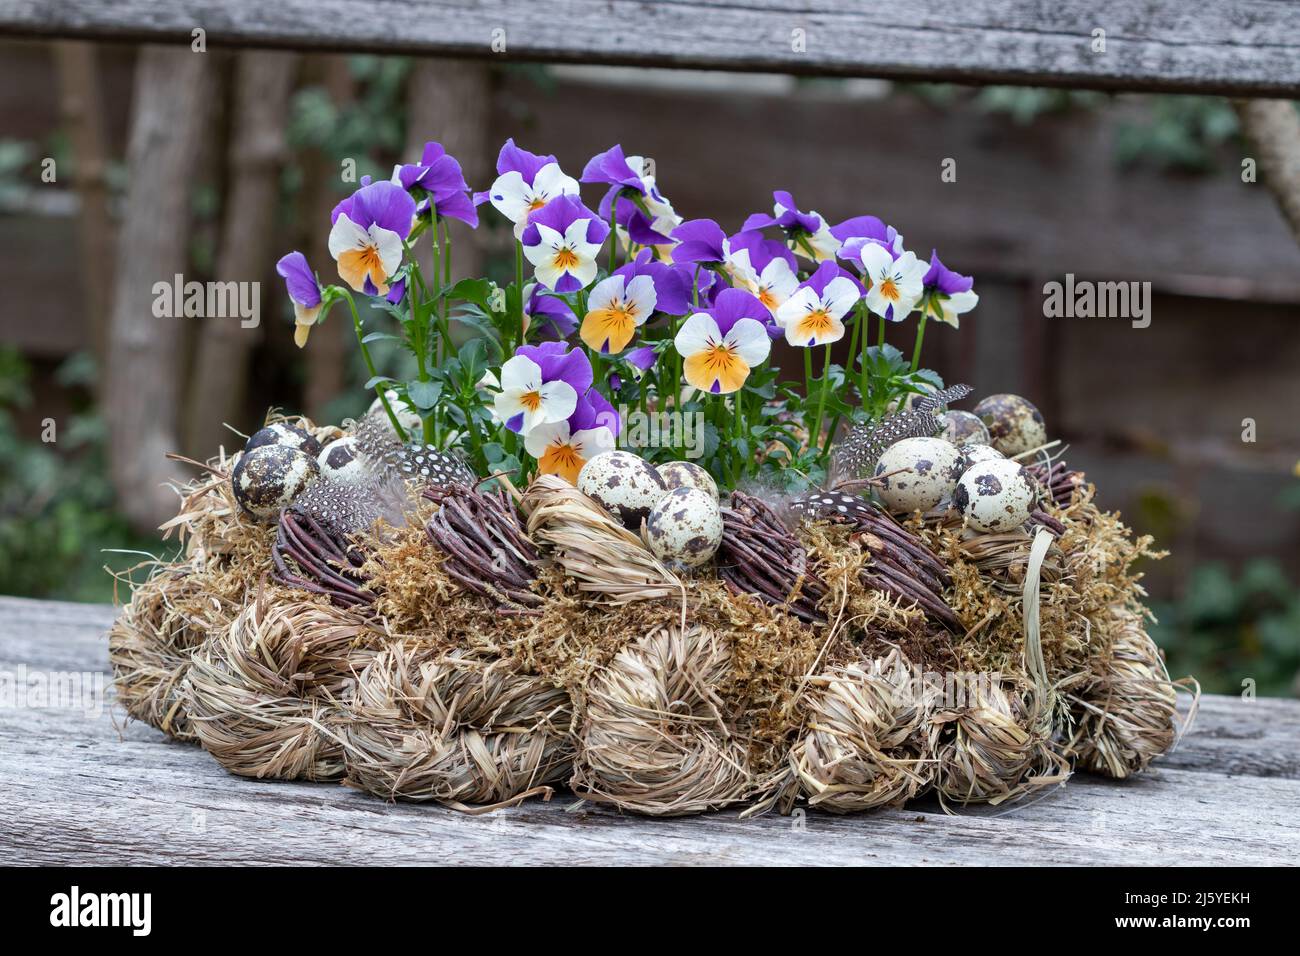 purple and orange viola flowers in wreath of moss, branches and straw Stock Photo